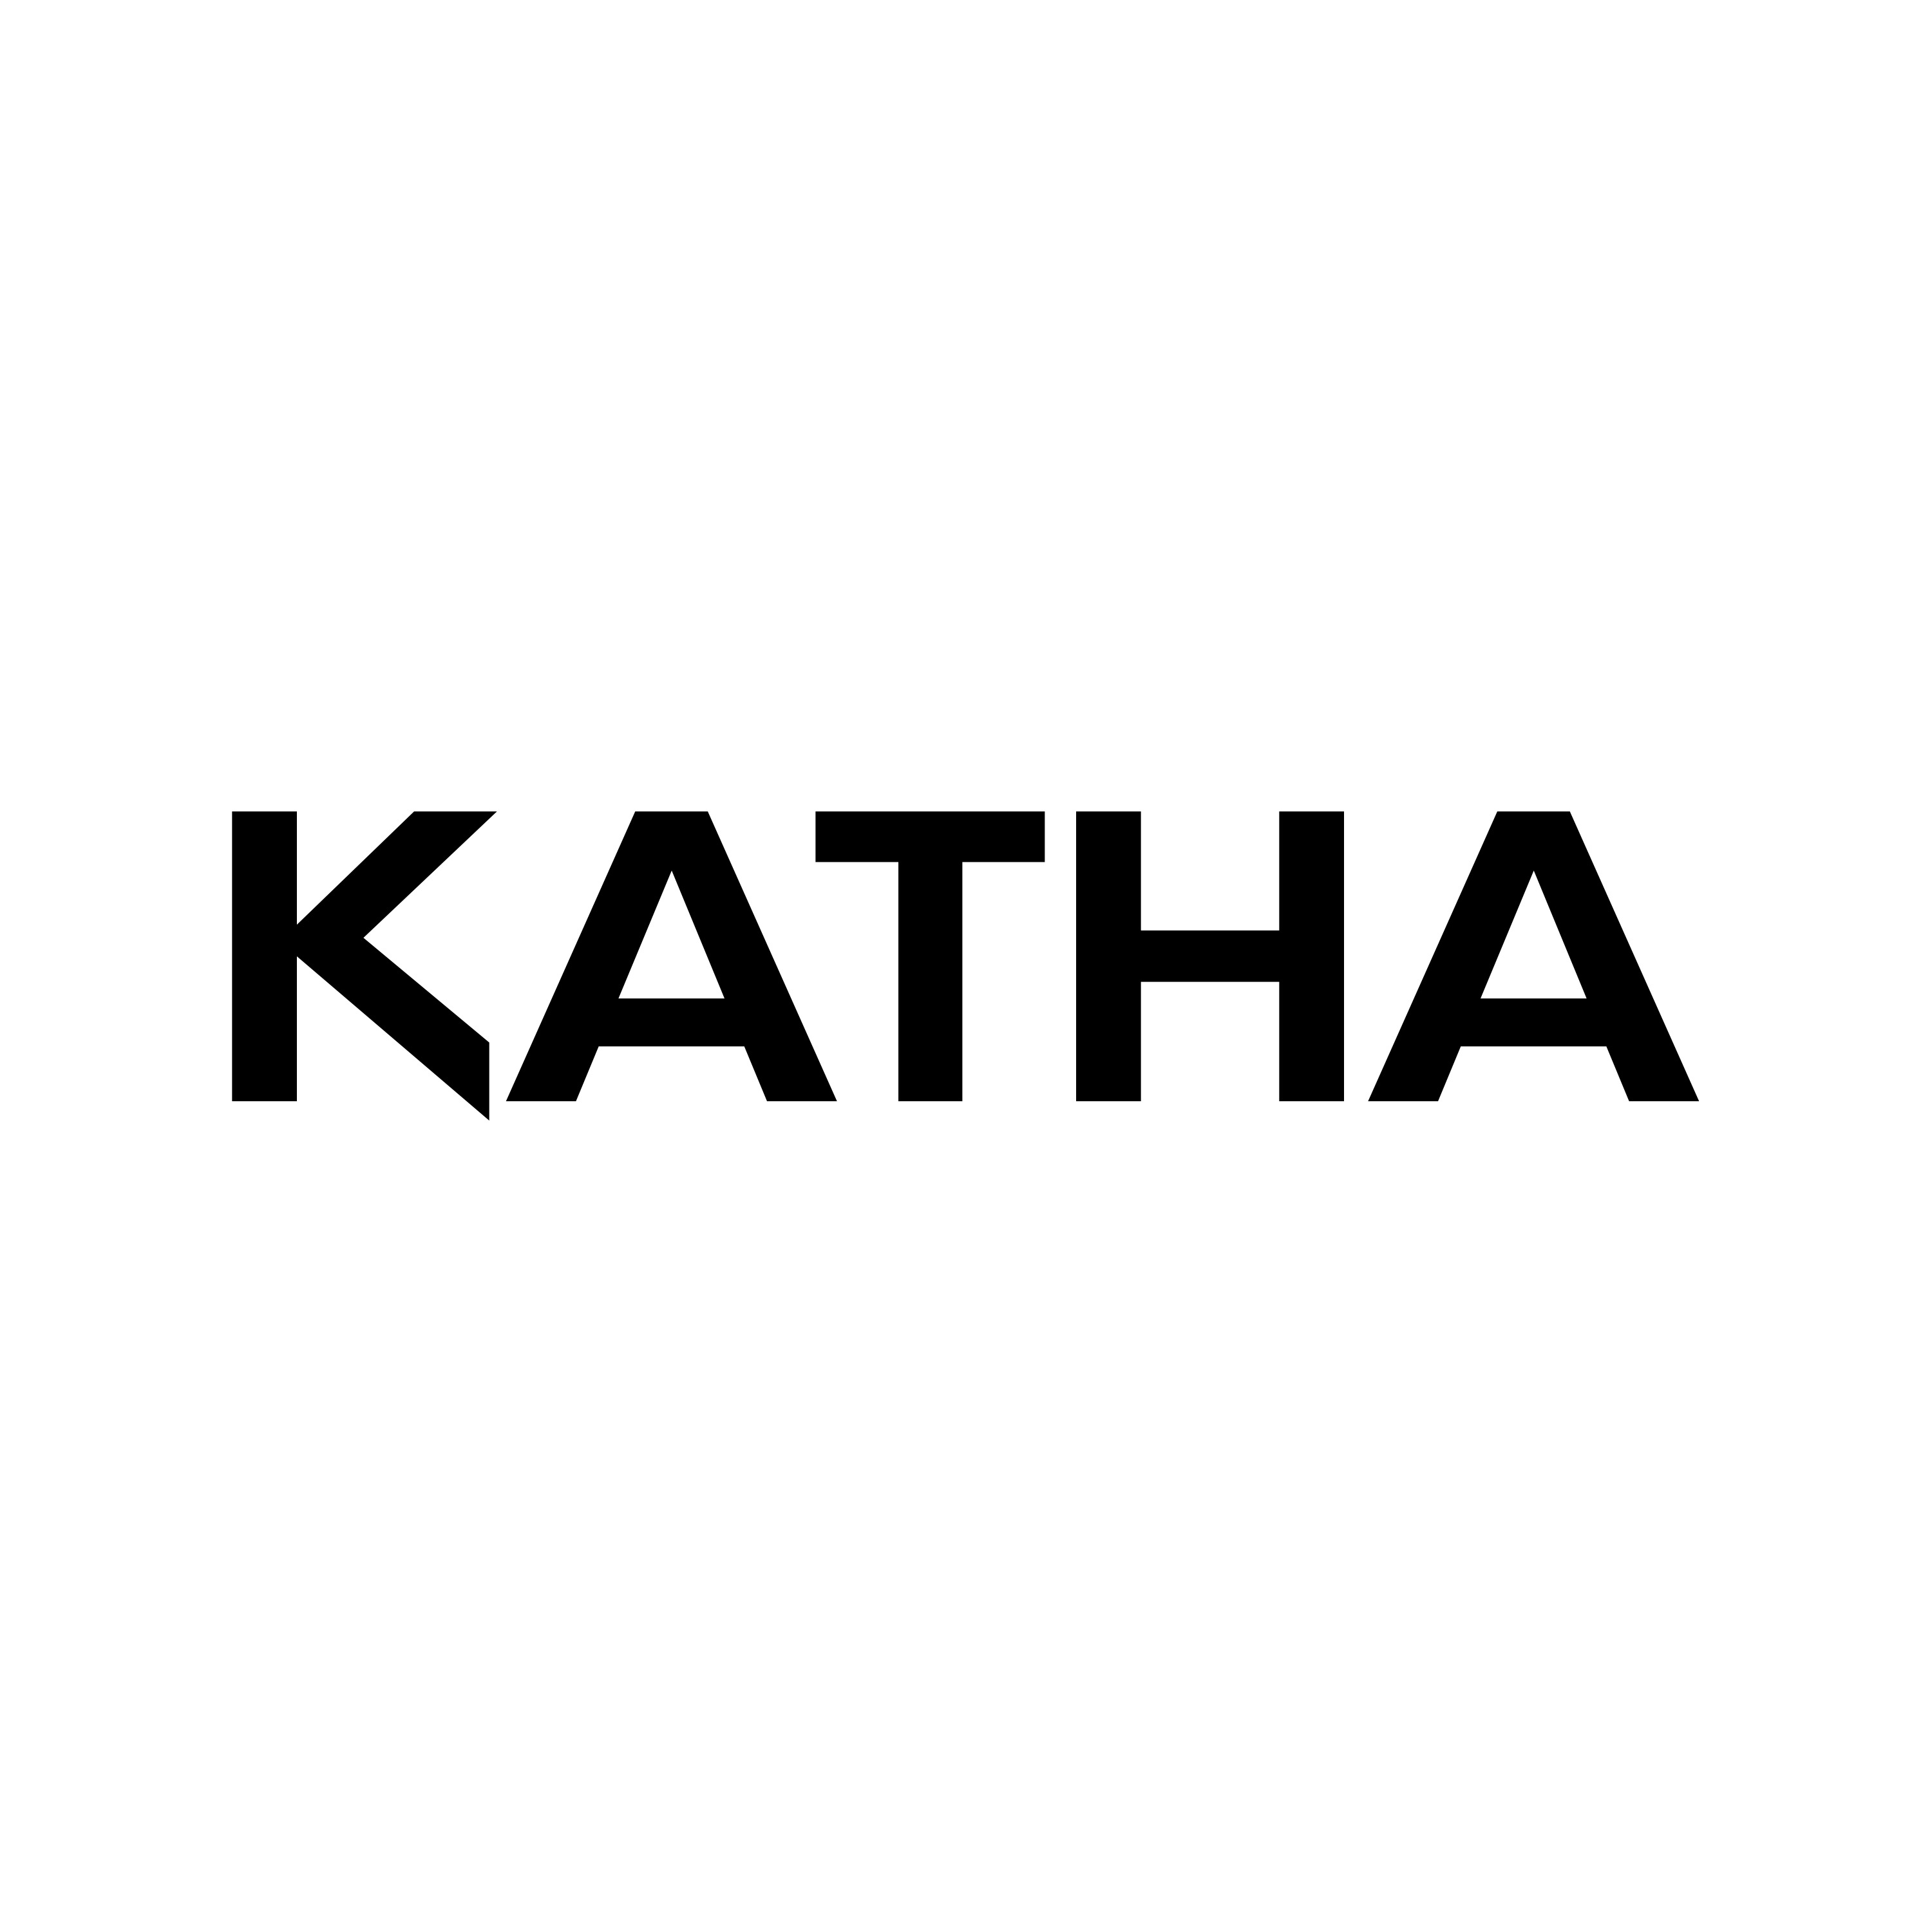 Shop online with Katha Bags now! Visit Katha Bags on Lazada.